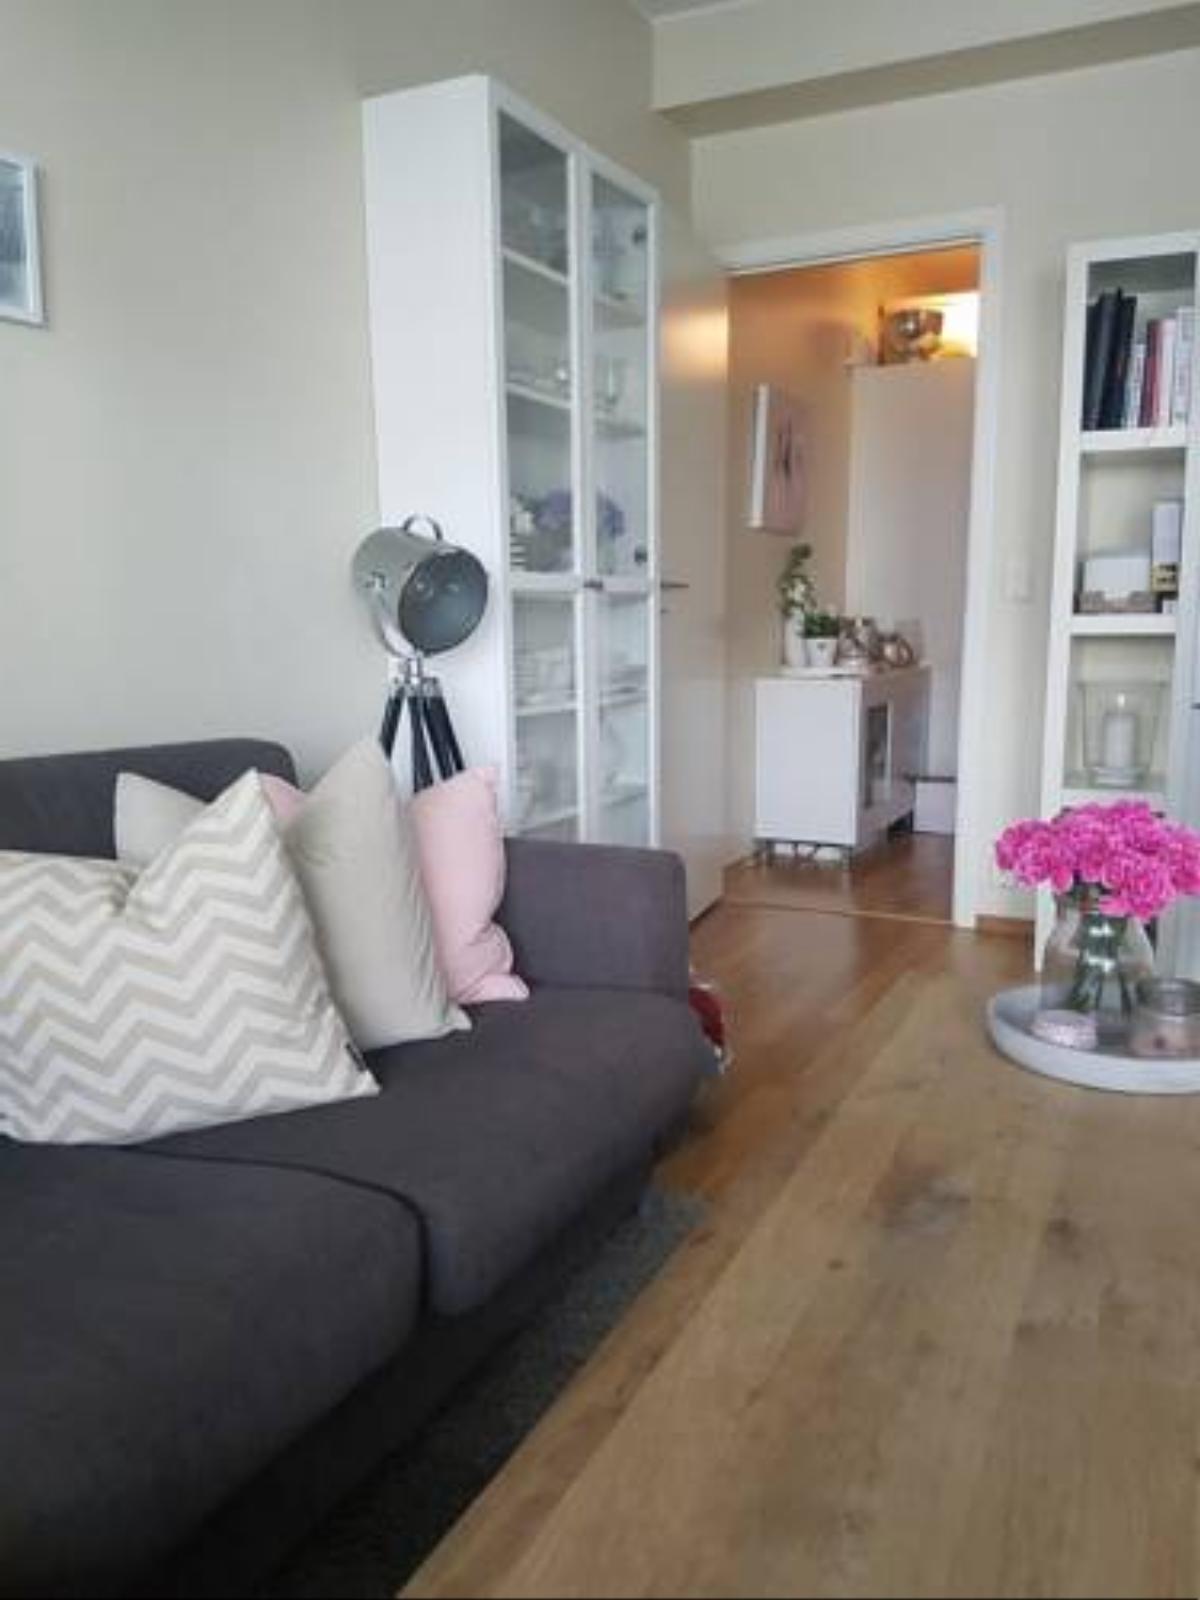 Fully furnished apartment centrally located in Bergen (ID 12509) Hotel Bergen Norway